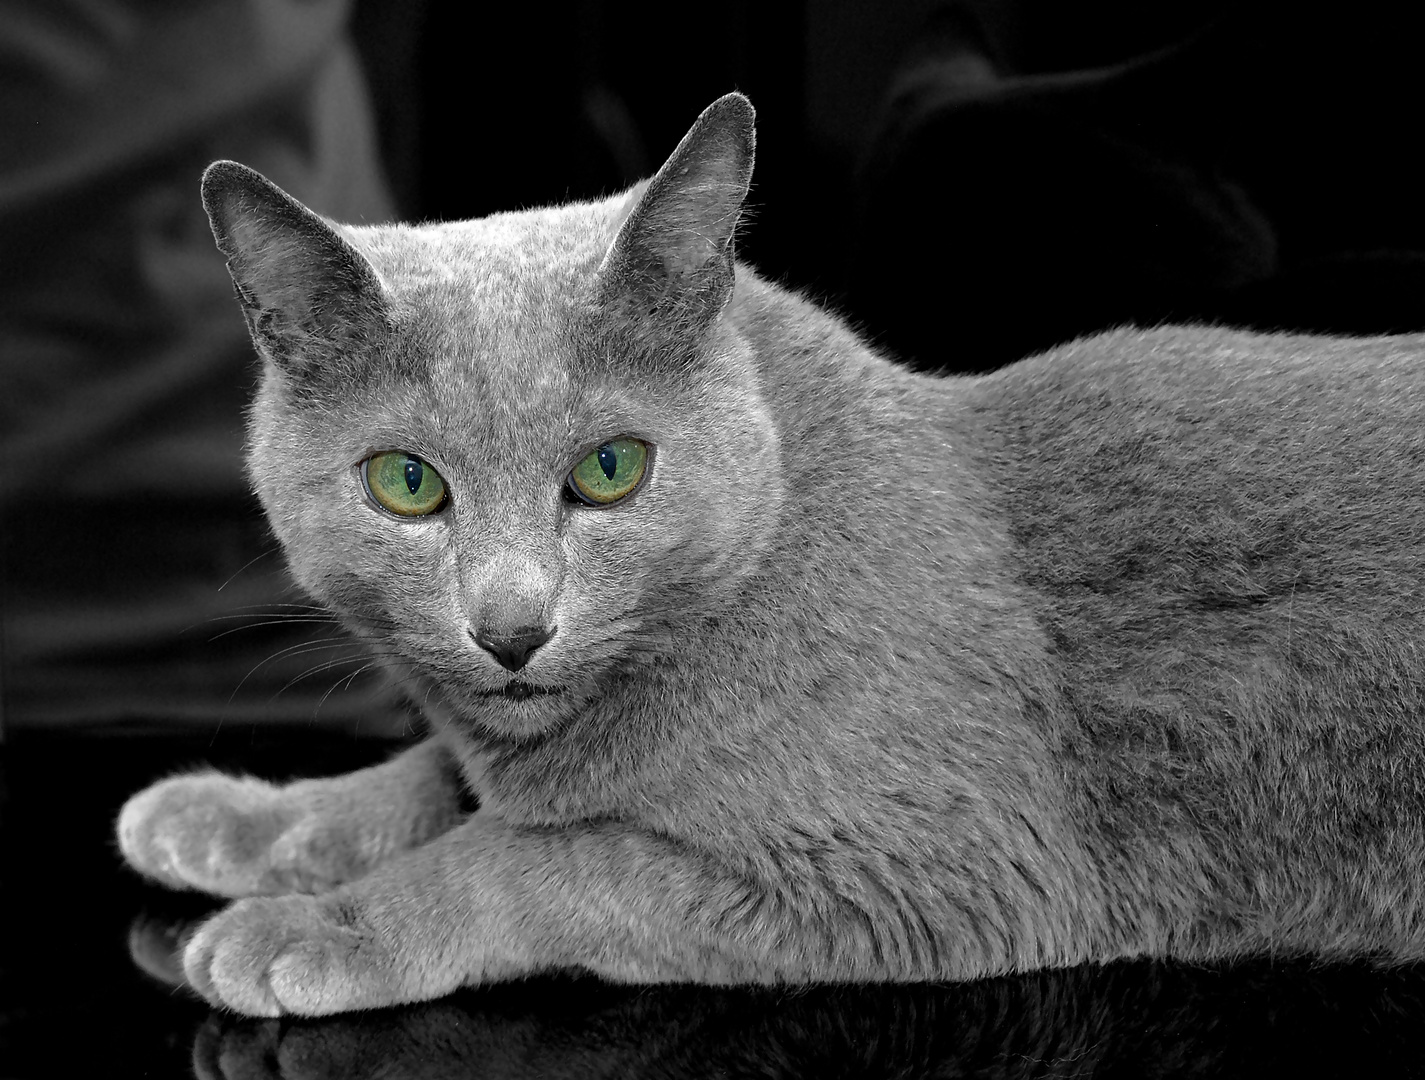 The cat with the green eyes VII